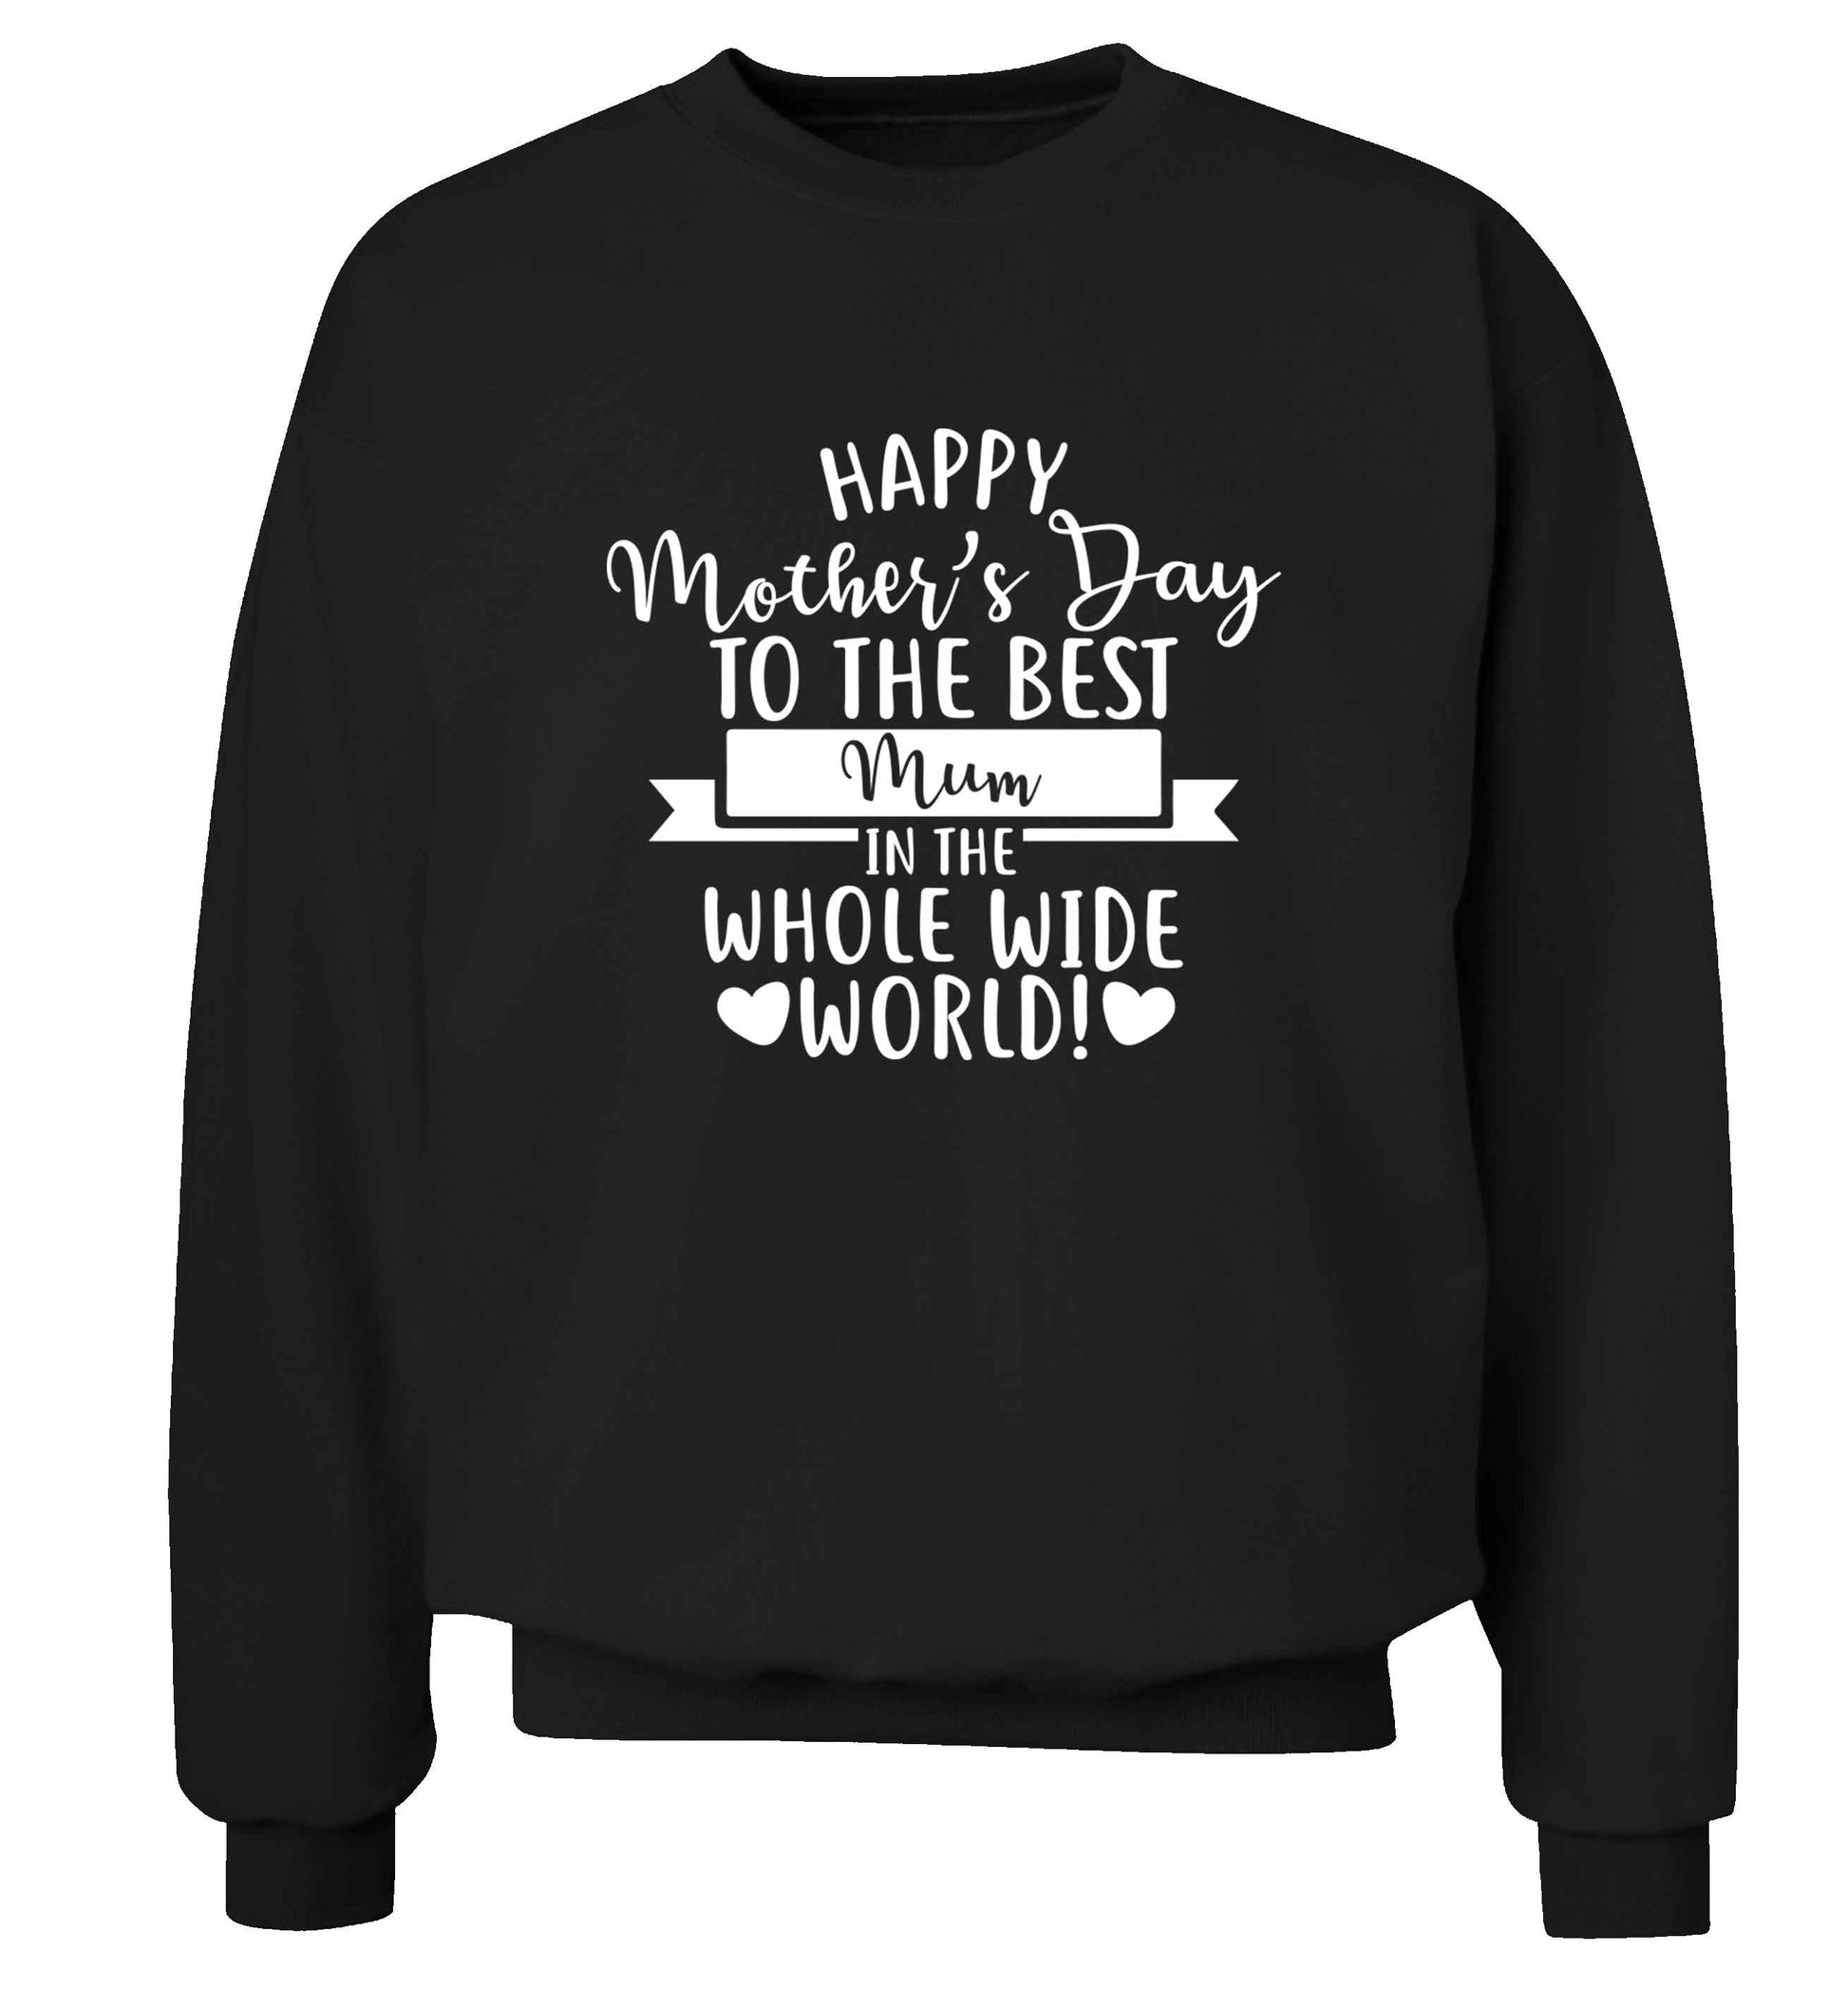 Happy mother's day to the best mum in the world adult's unisex black sweater 2XL